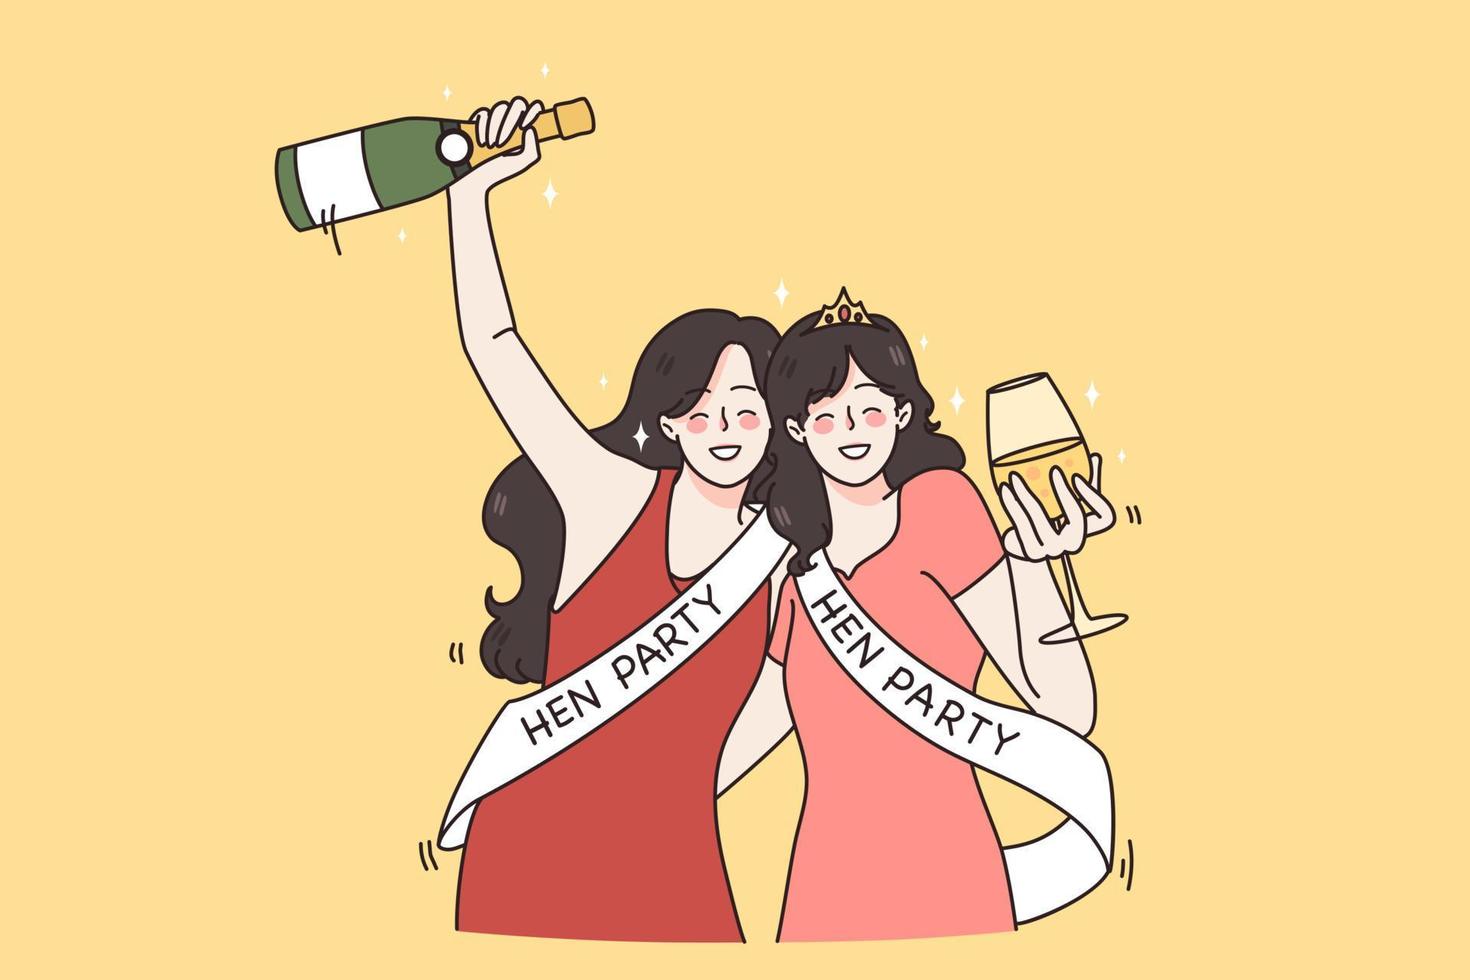 Smiling girlfriends drink champagne celebrate hen party together. Happy young women in dressed have fun at bachelorette celebration. Marriage and engagement. Bride to be. Flat vector illustration.